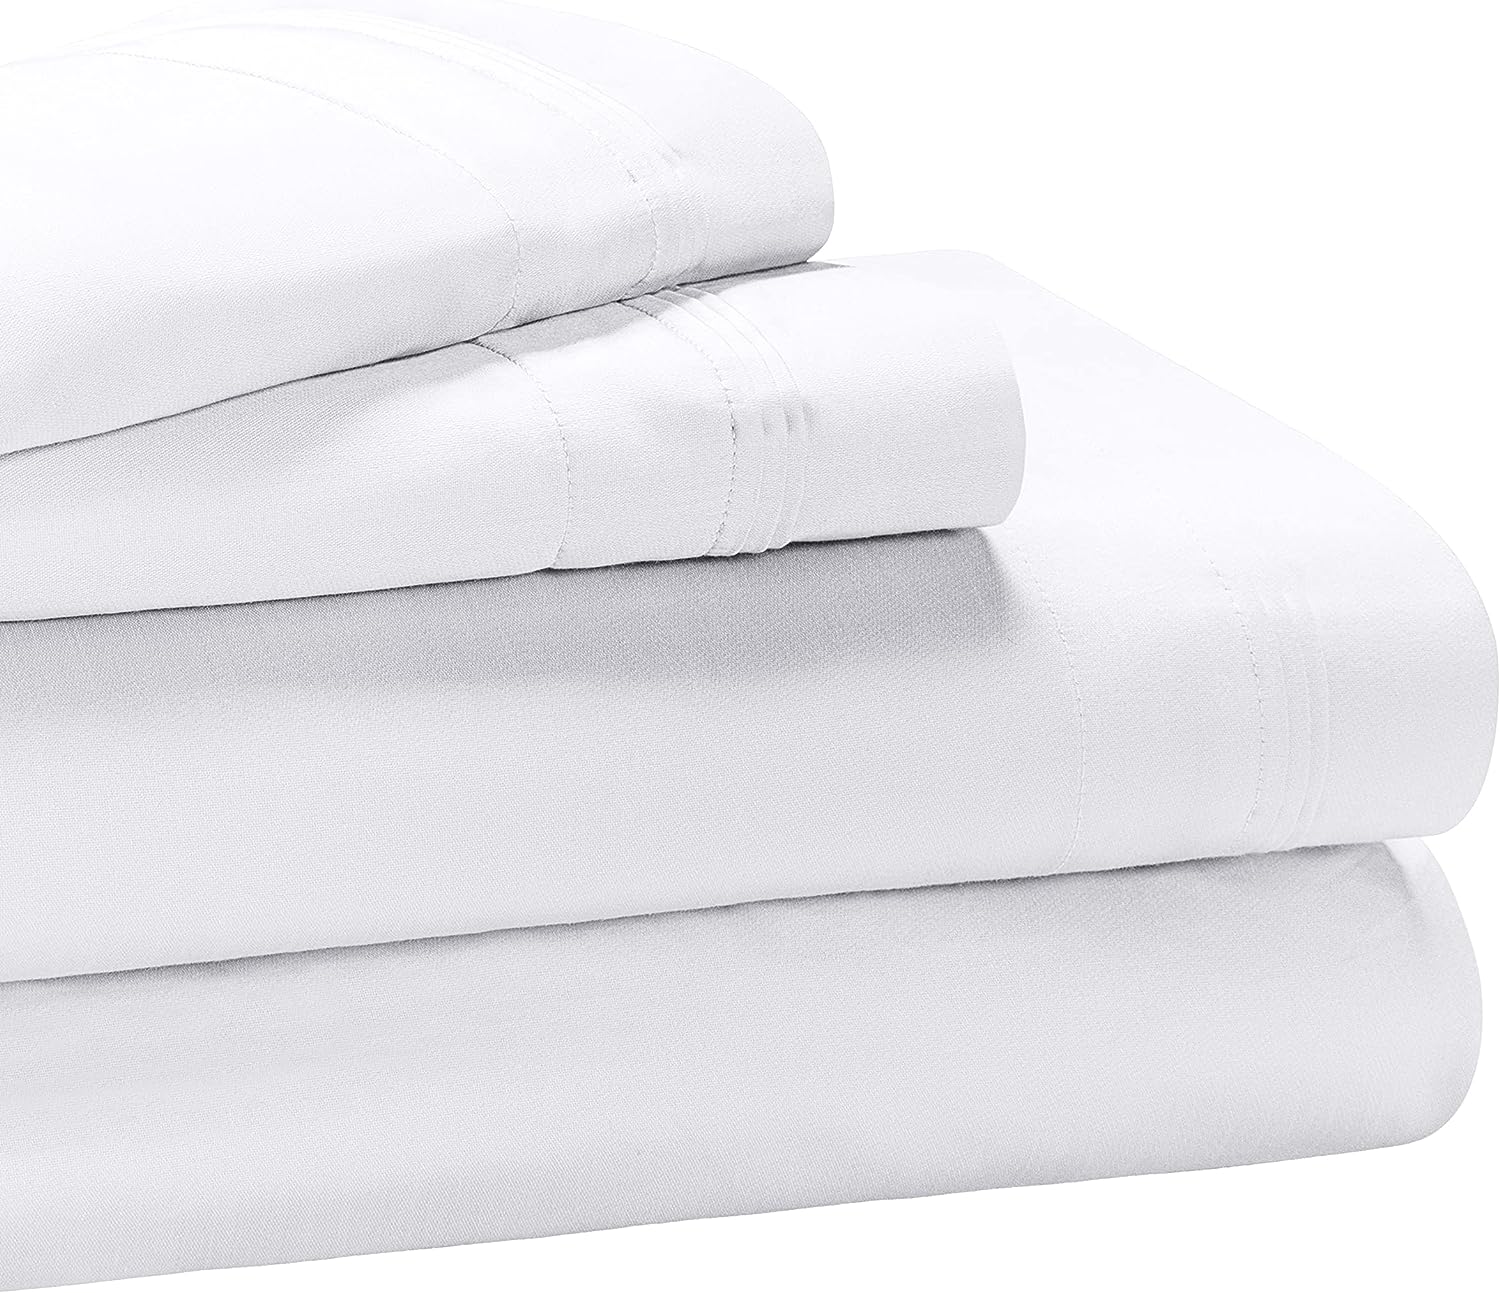 Superior Egyptian Cotton 1000 Thread Count Extra Deep Pocket Solid Sheet Set - White